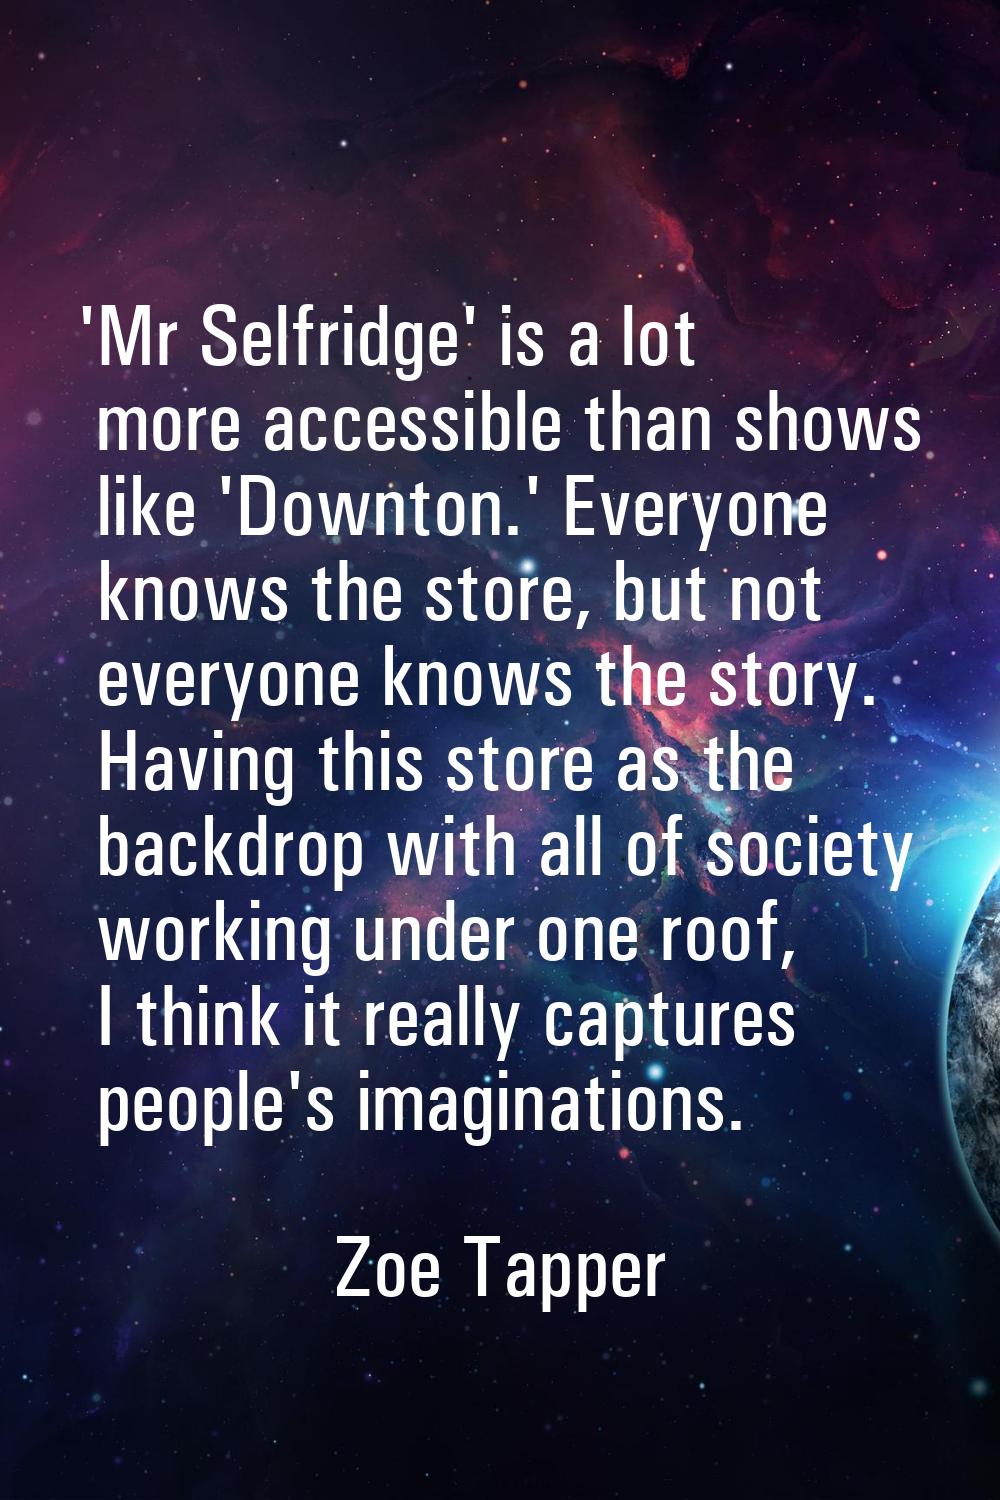 'Mr Selfridge' is a lot more accessible than shows like 'Downton.' Everyone knows the store, but no